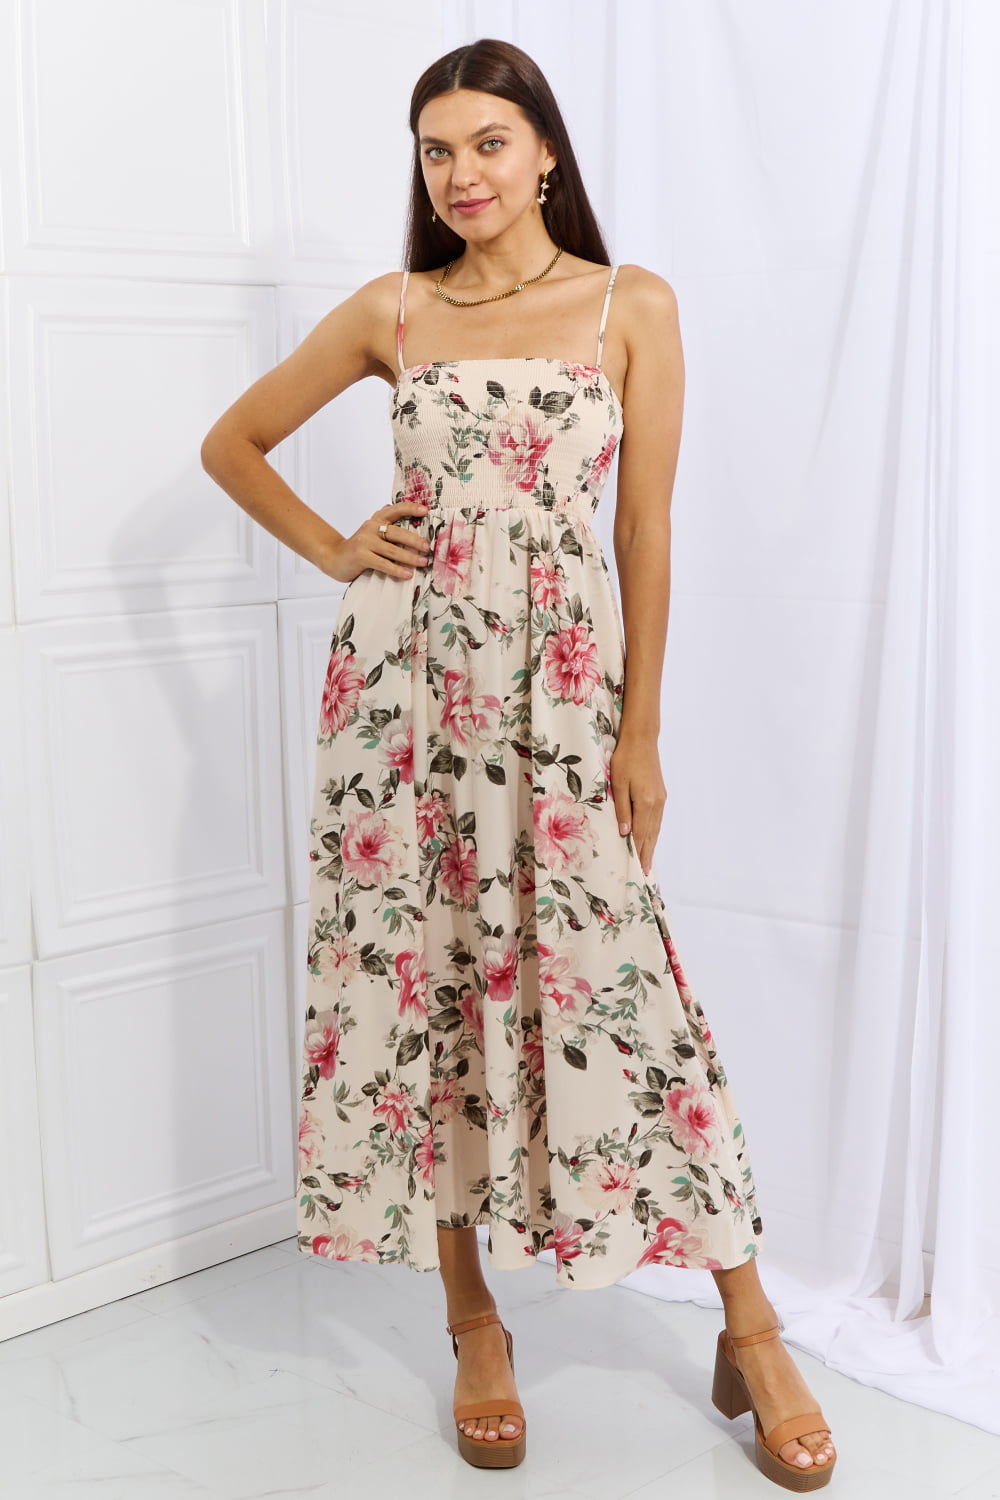 Hold Me Tight Sleeveless Floral Maxi Dress in Pink